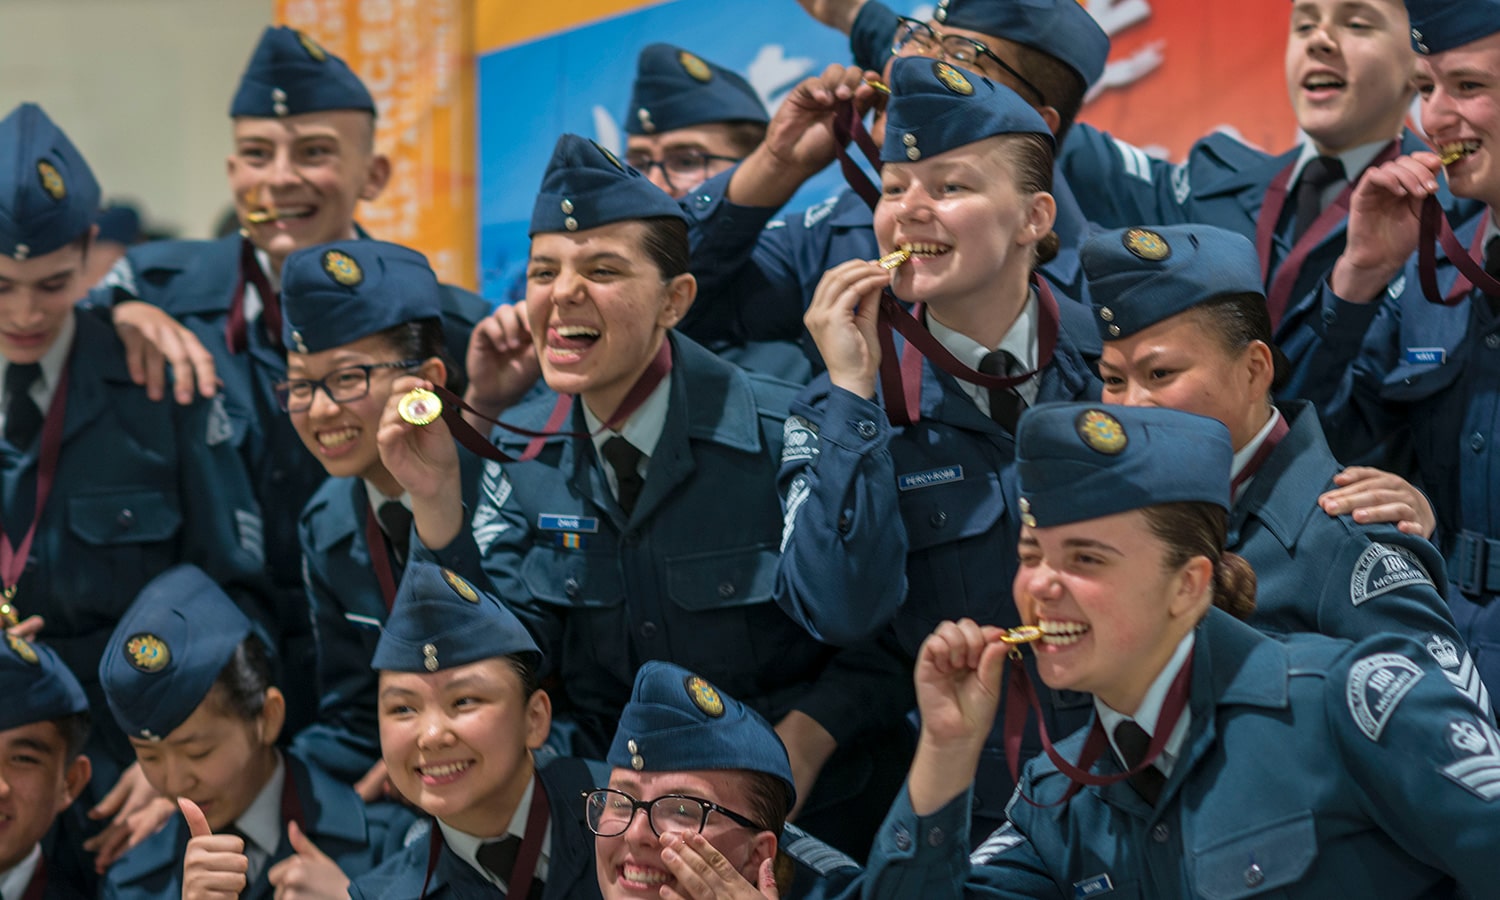 Cadets celebrate earning medals at an event